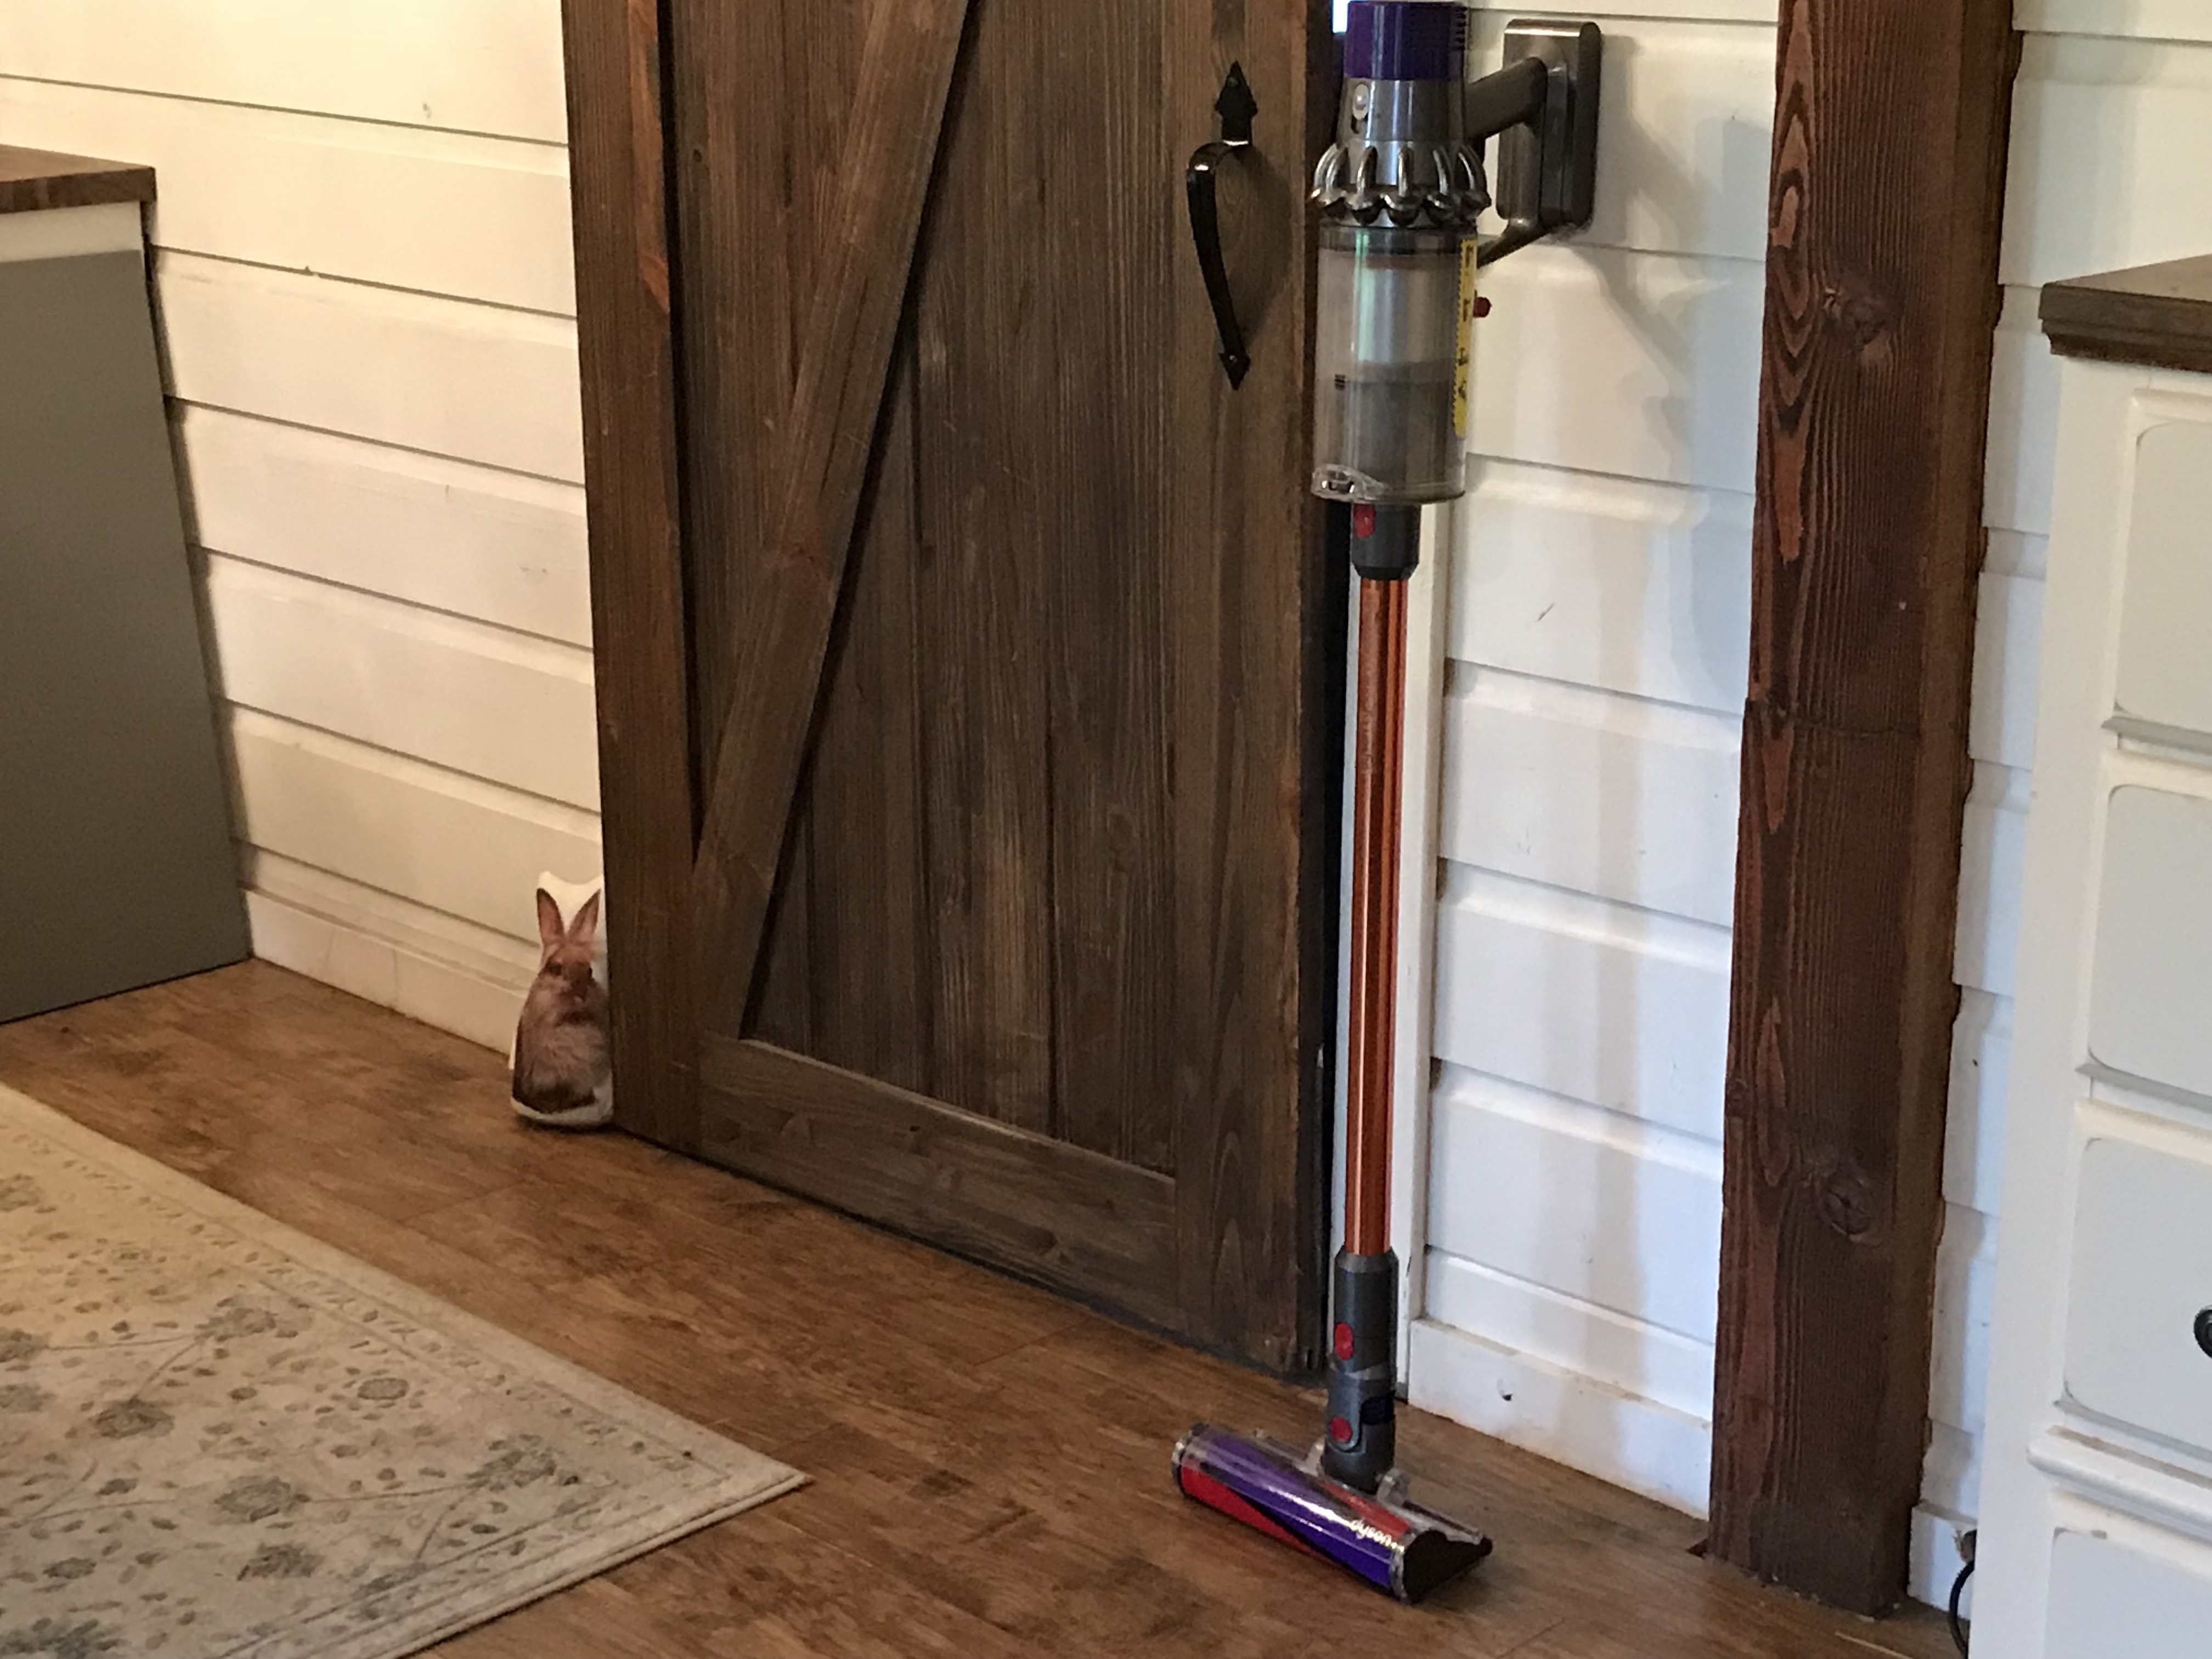 Dyson V10 Absolute Stick Vacuum Cleaner Review